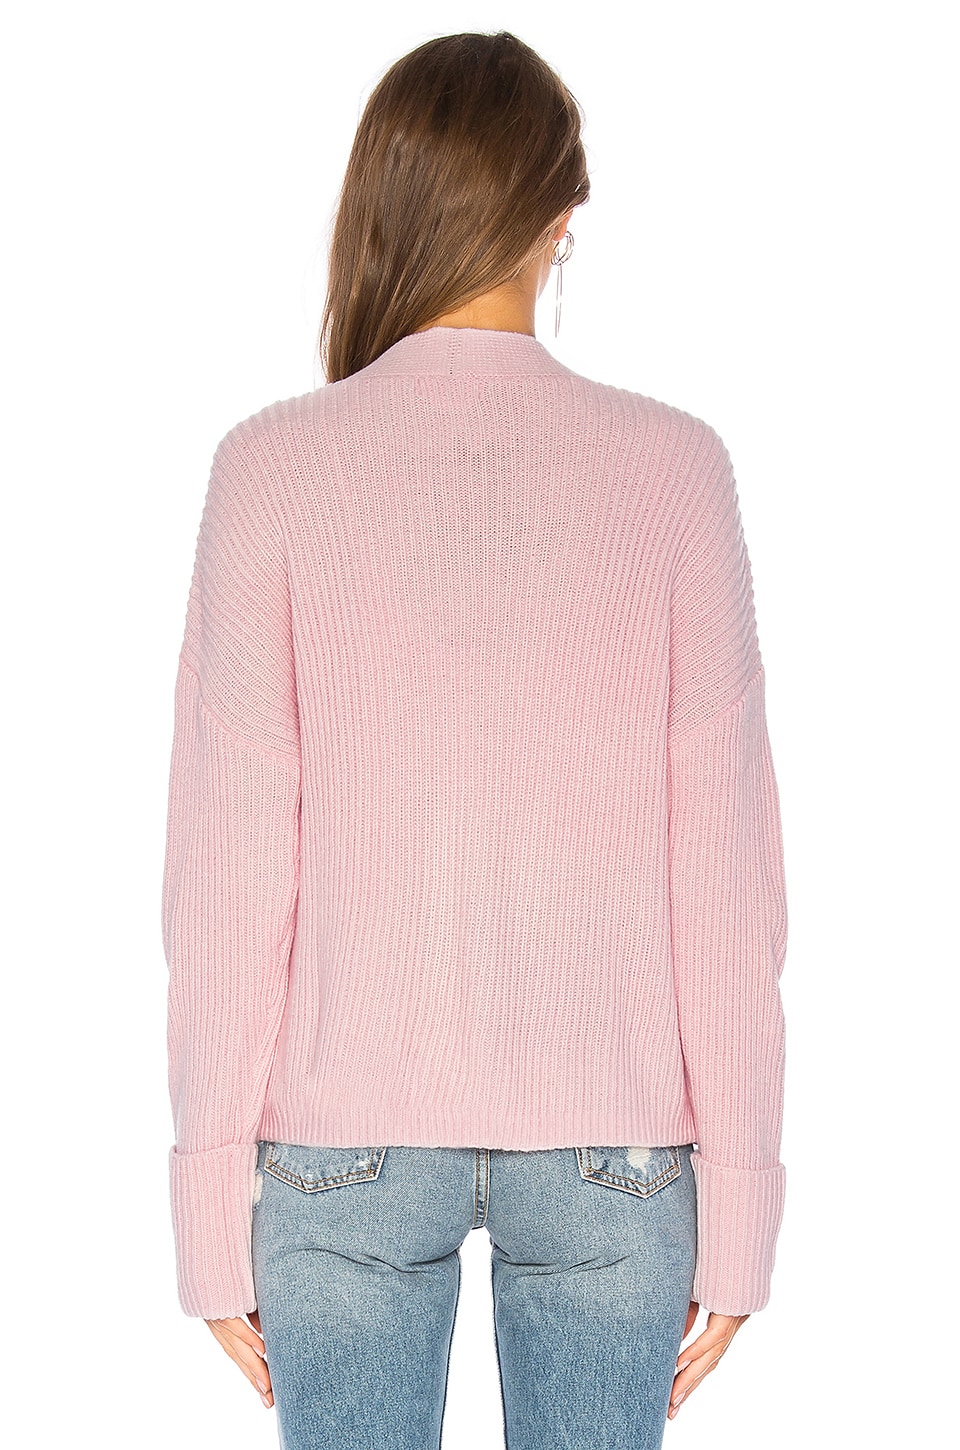 Lovers + Friends Avery Cardigan in Pink | REVOLVE